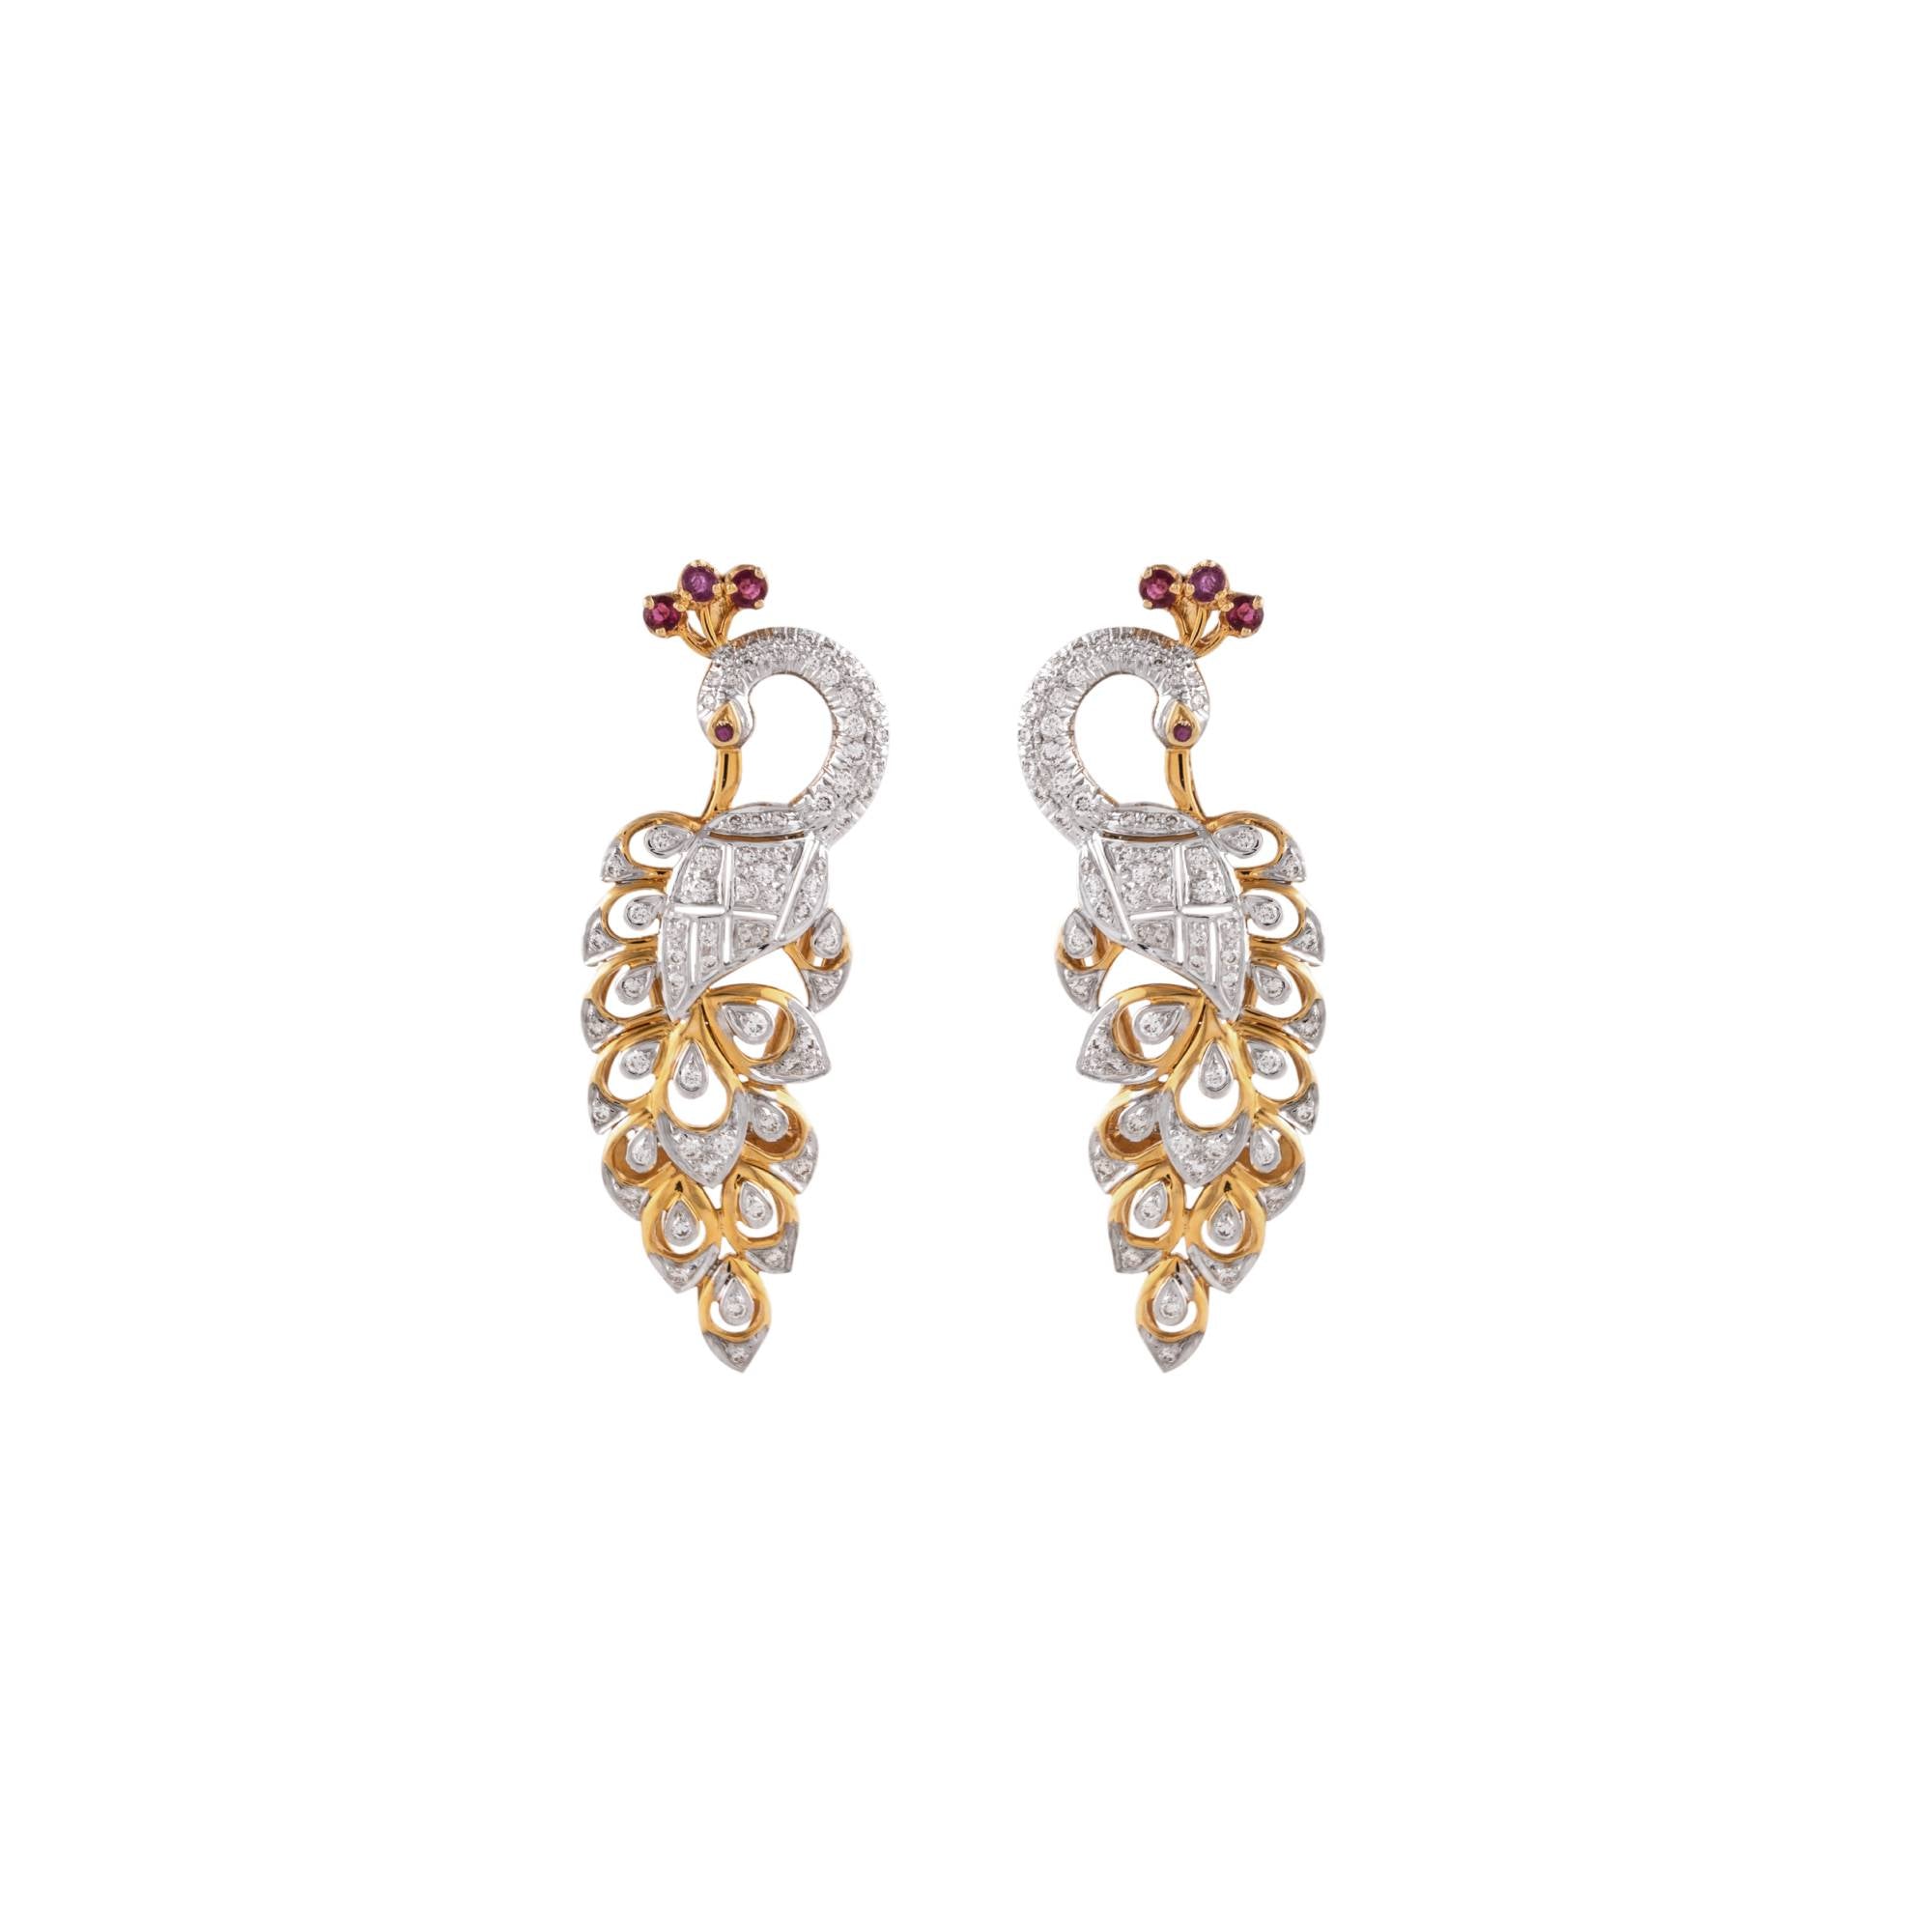 Earring pair with Round Cut Diamond and Round Cut Ruby (Peacock Design) - GDNE0413